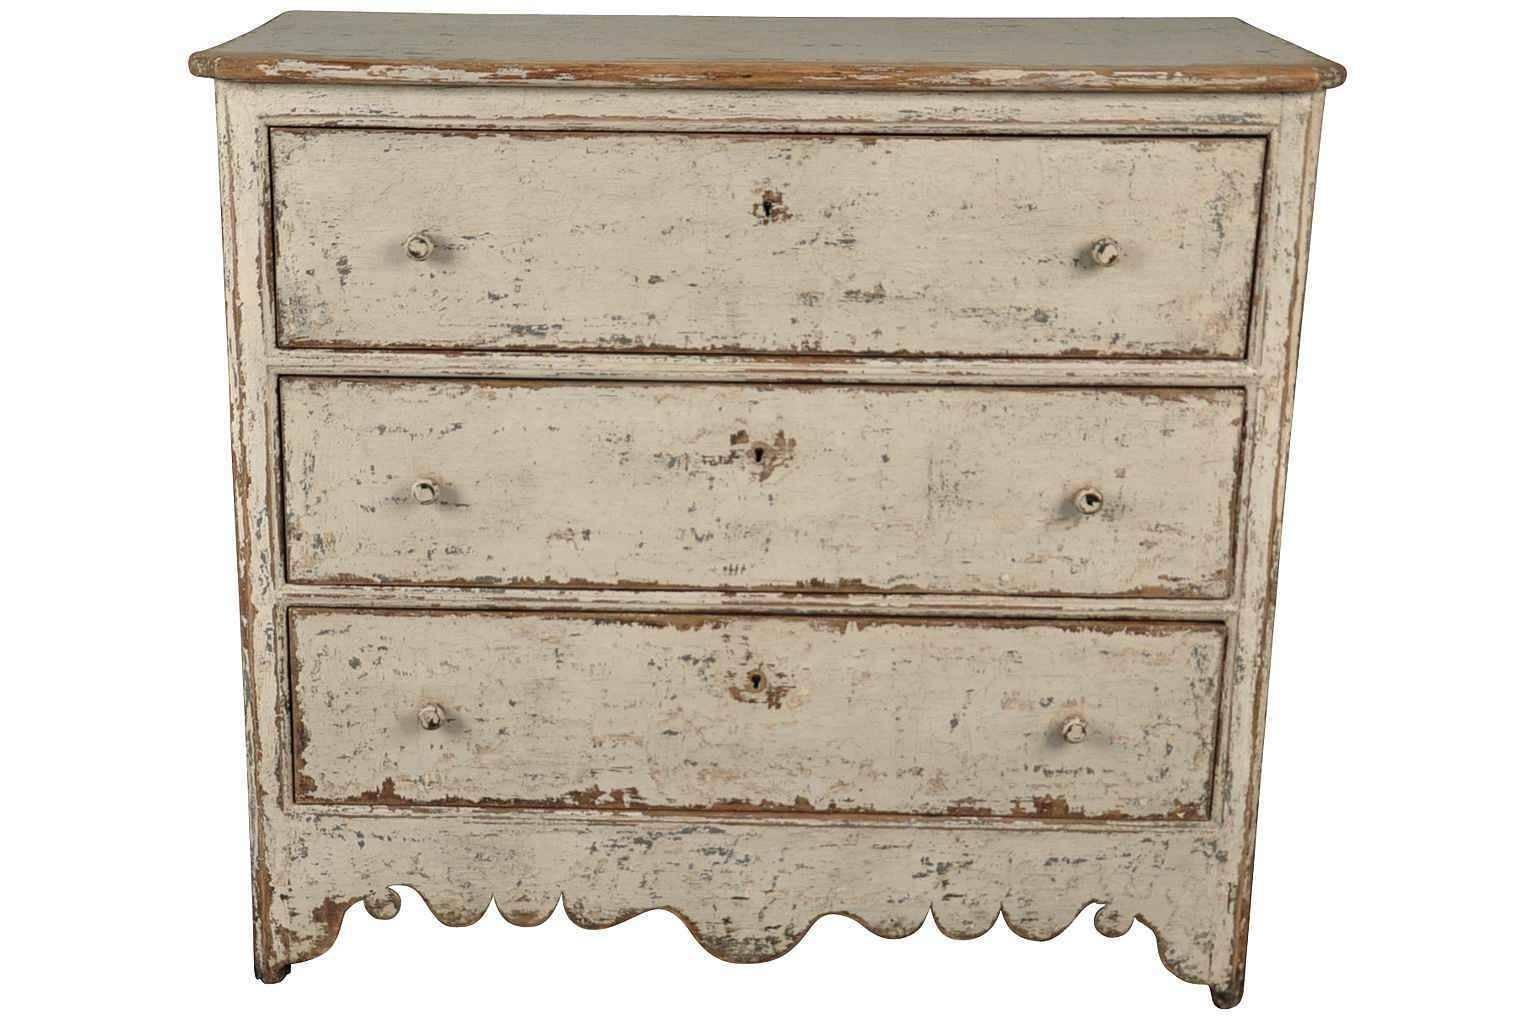 A charming later 19th century commode from Spain in painted wood. Great patina and painted finish.